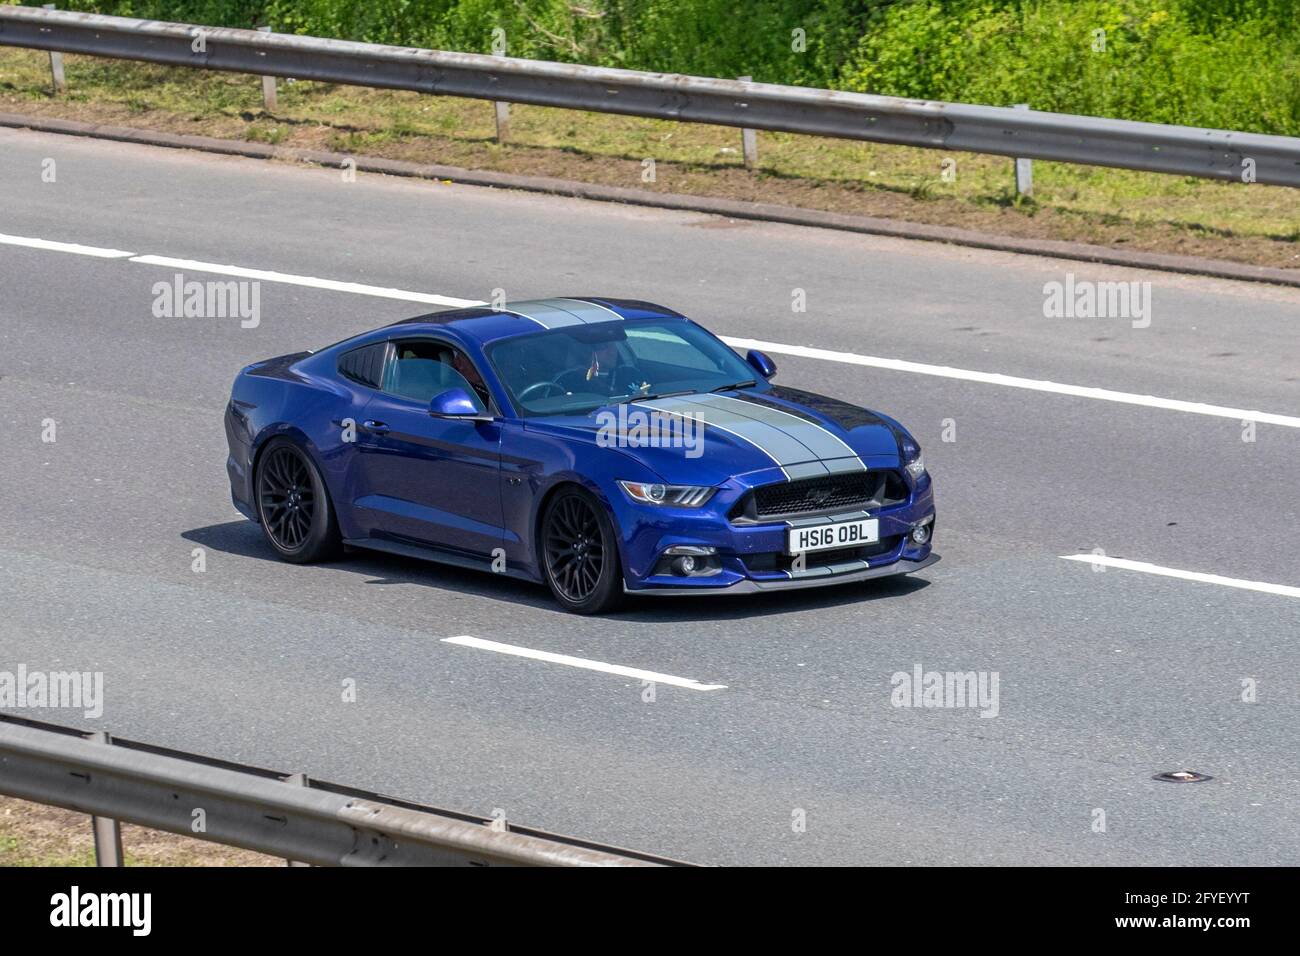 2016 Ford Mustang GT Blue 4951cc muscle car; Vehicular traffic, moving vehicles, cars, vehicle driving on UK roads, motors, motoring on the M61 UK motorway network. Stock Photo